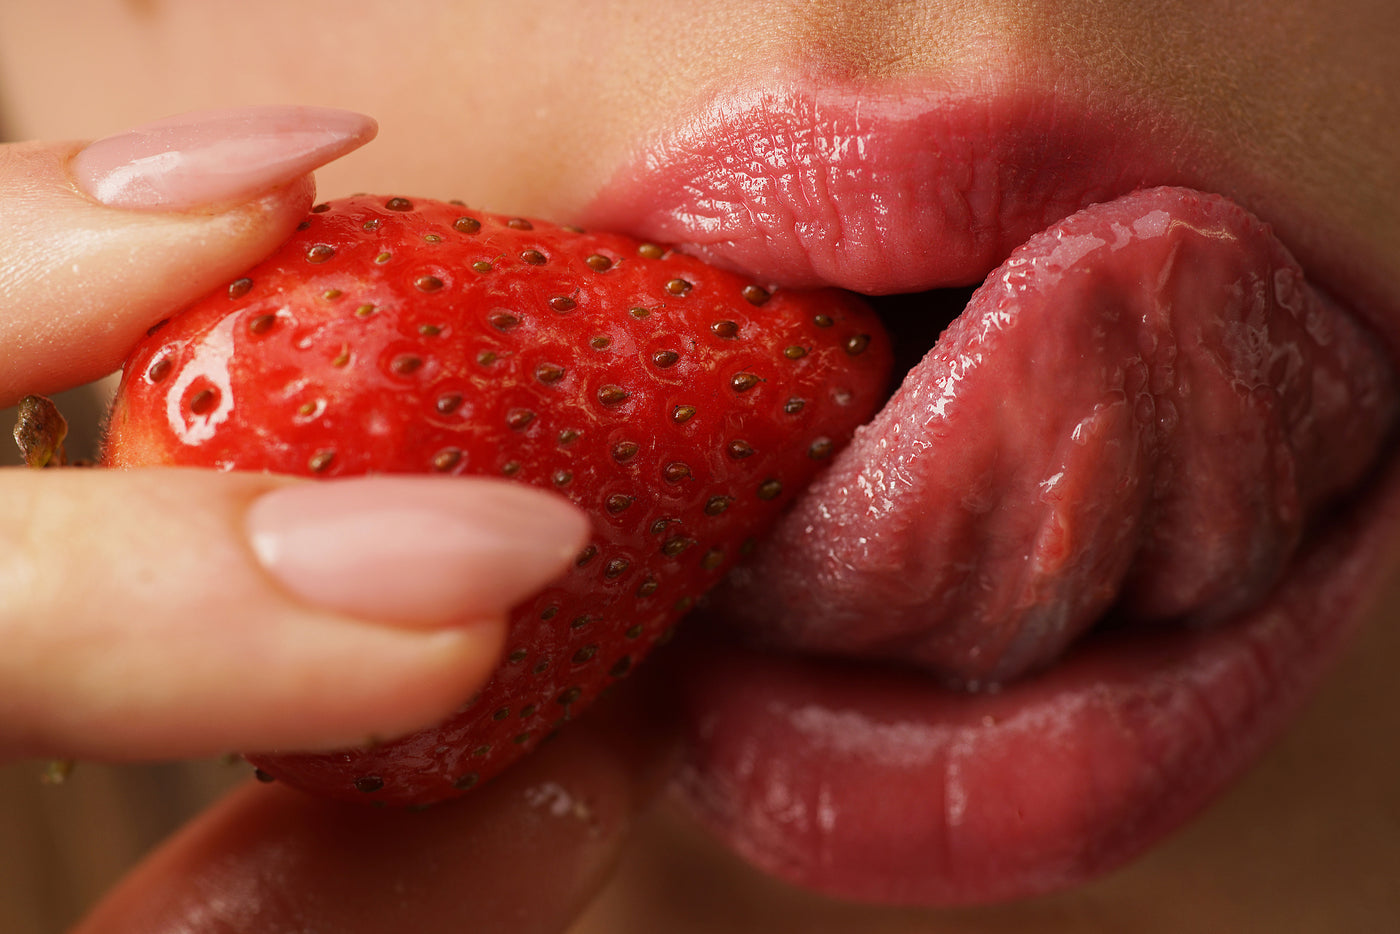 Woman holding strawberry on tongue 